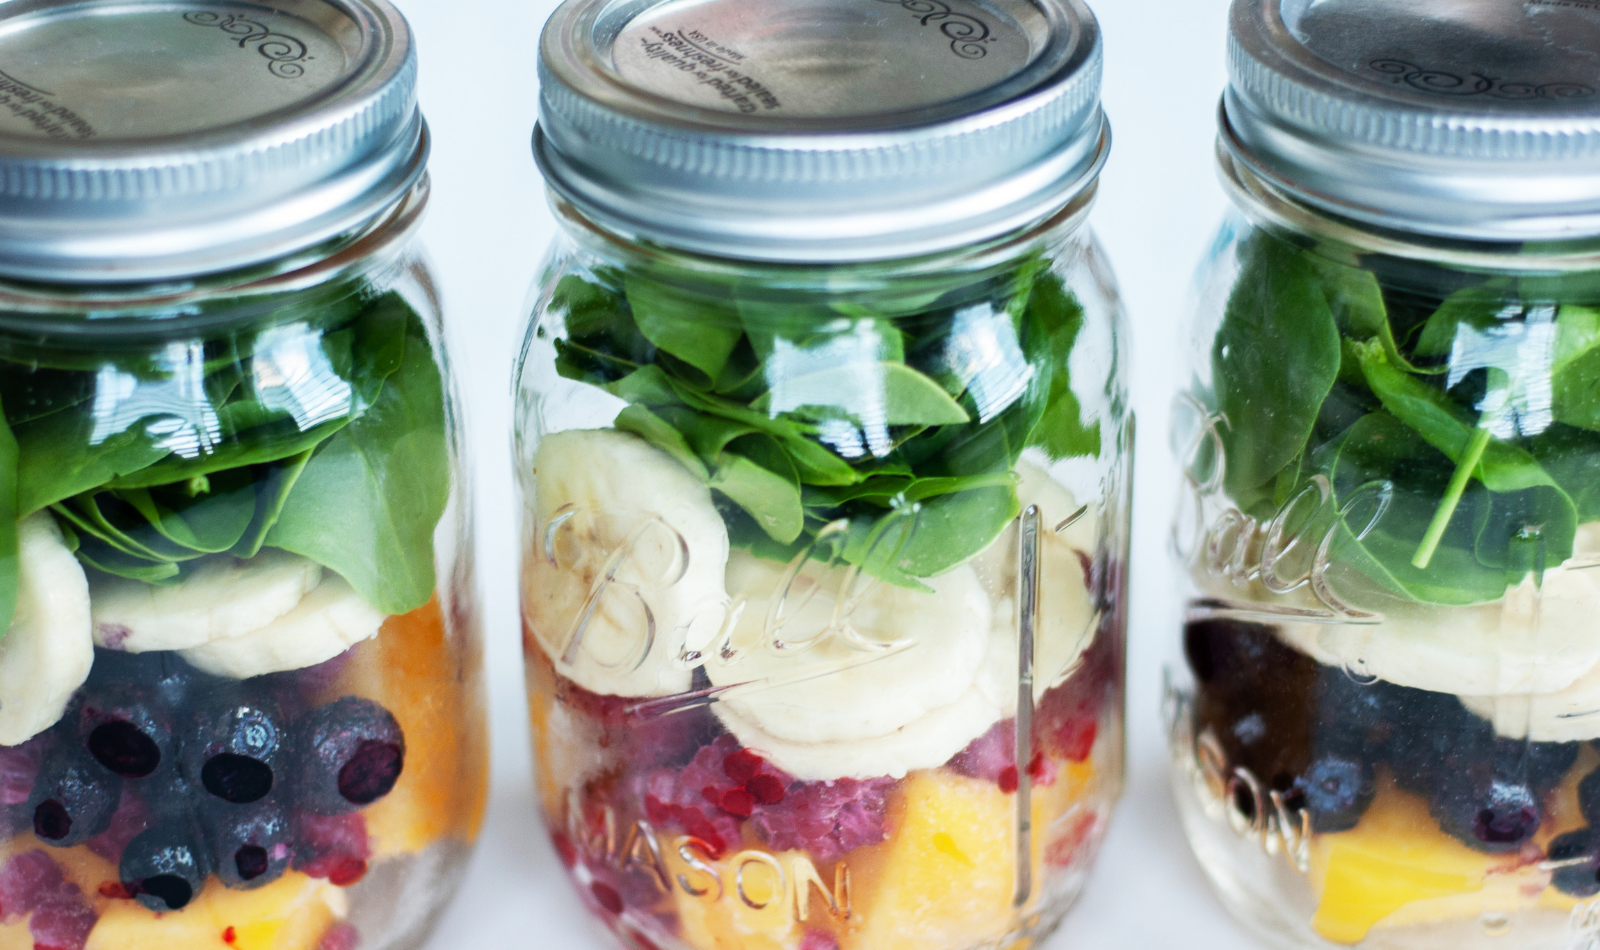 https://www.macrostax.com/wp-content/uploads/2021/12/Blog_Featured_Image_-__smoothie_jars.png